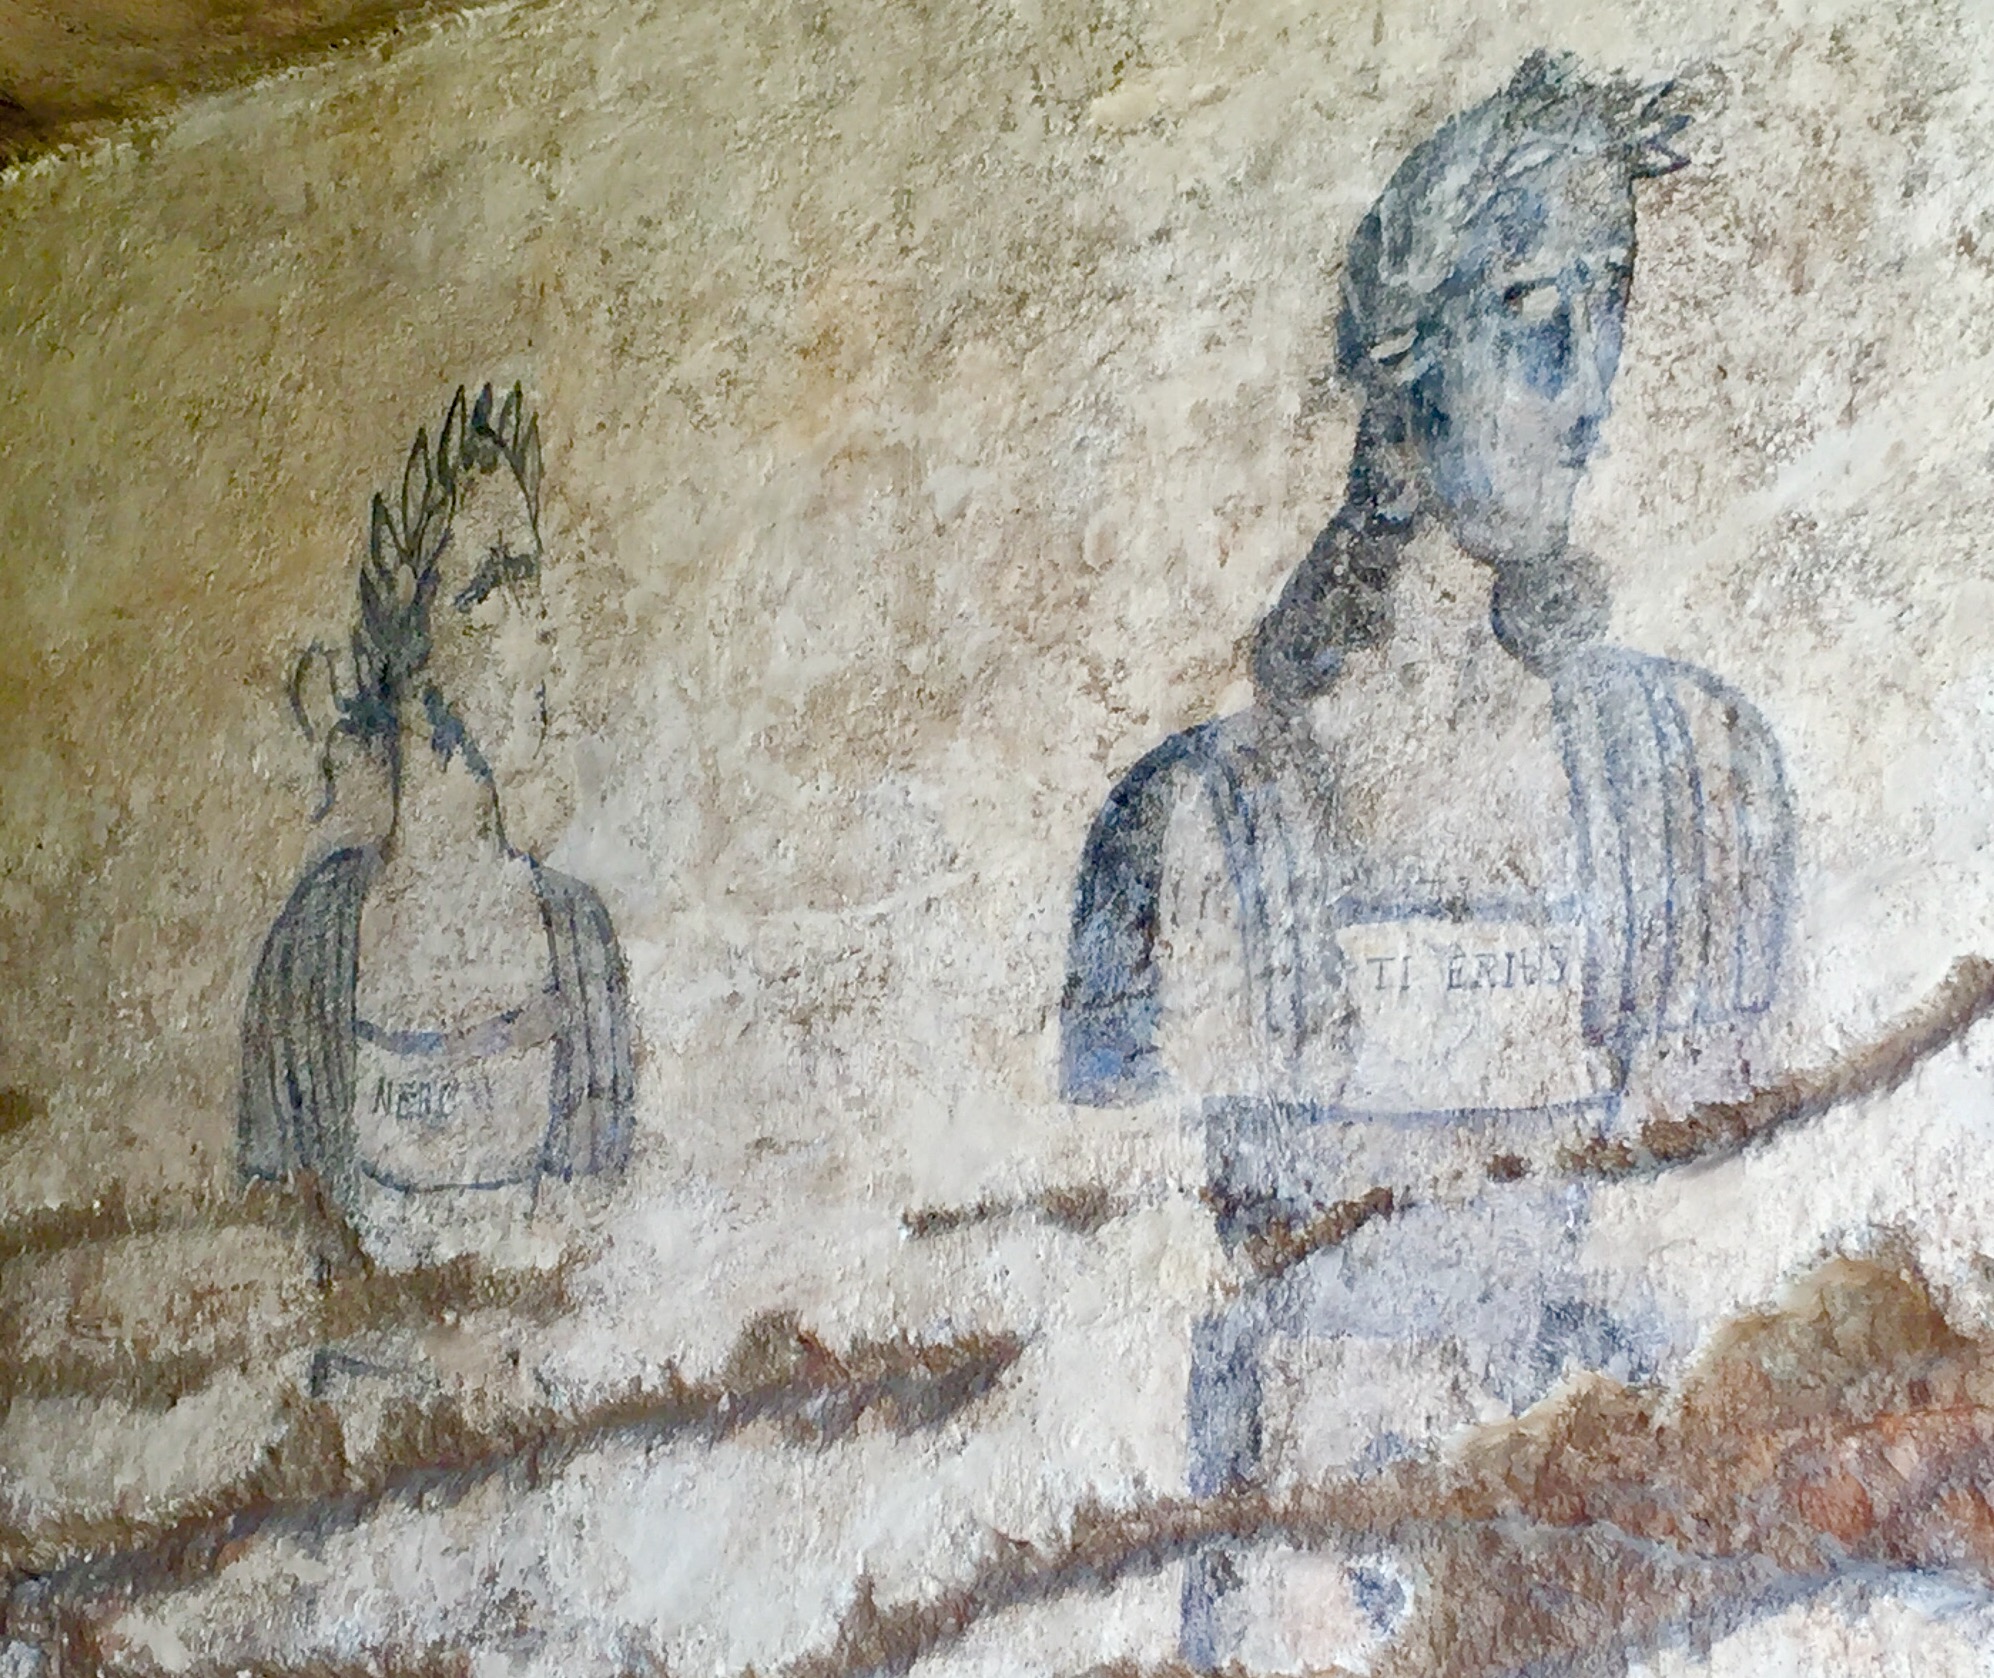 Wall paintings at the entrance to the tomb of Nero and Tiberus